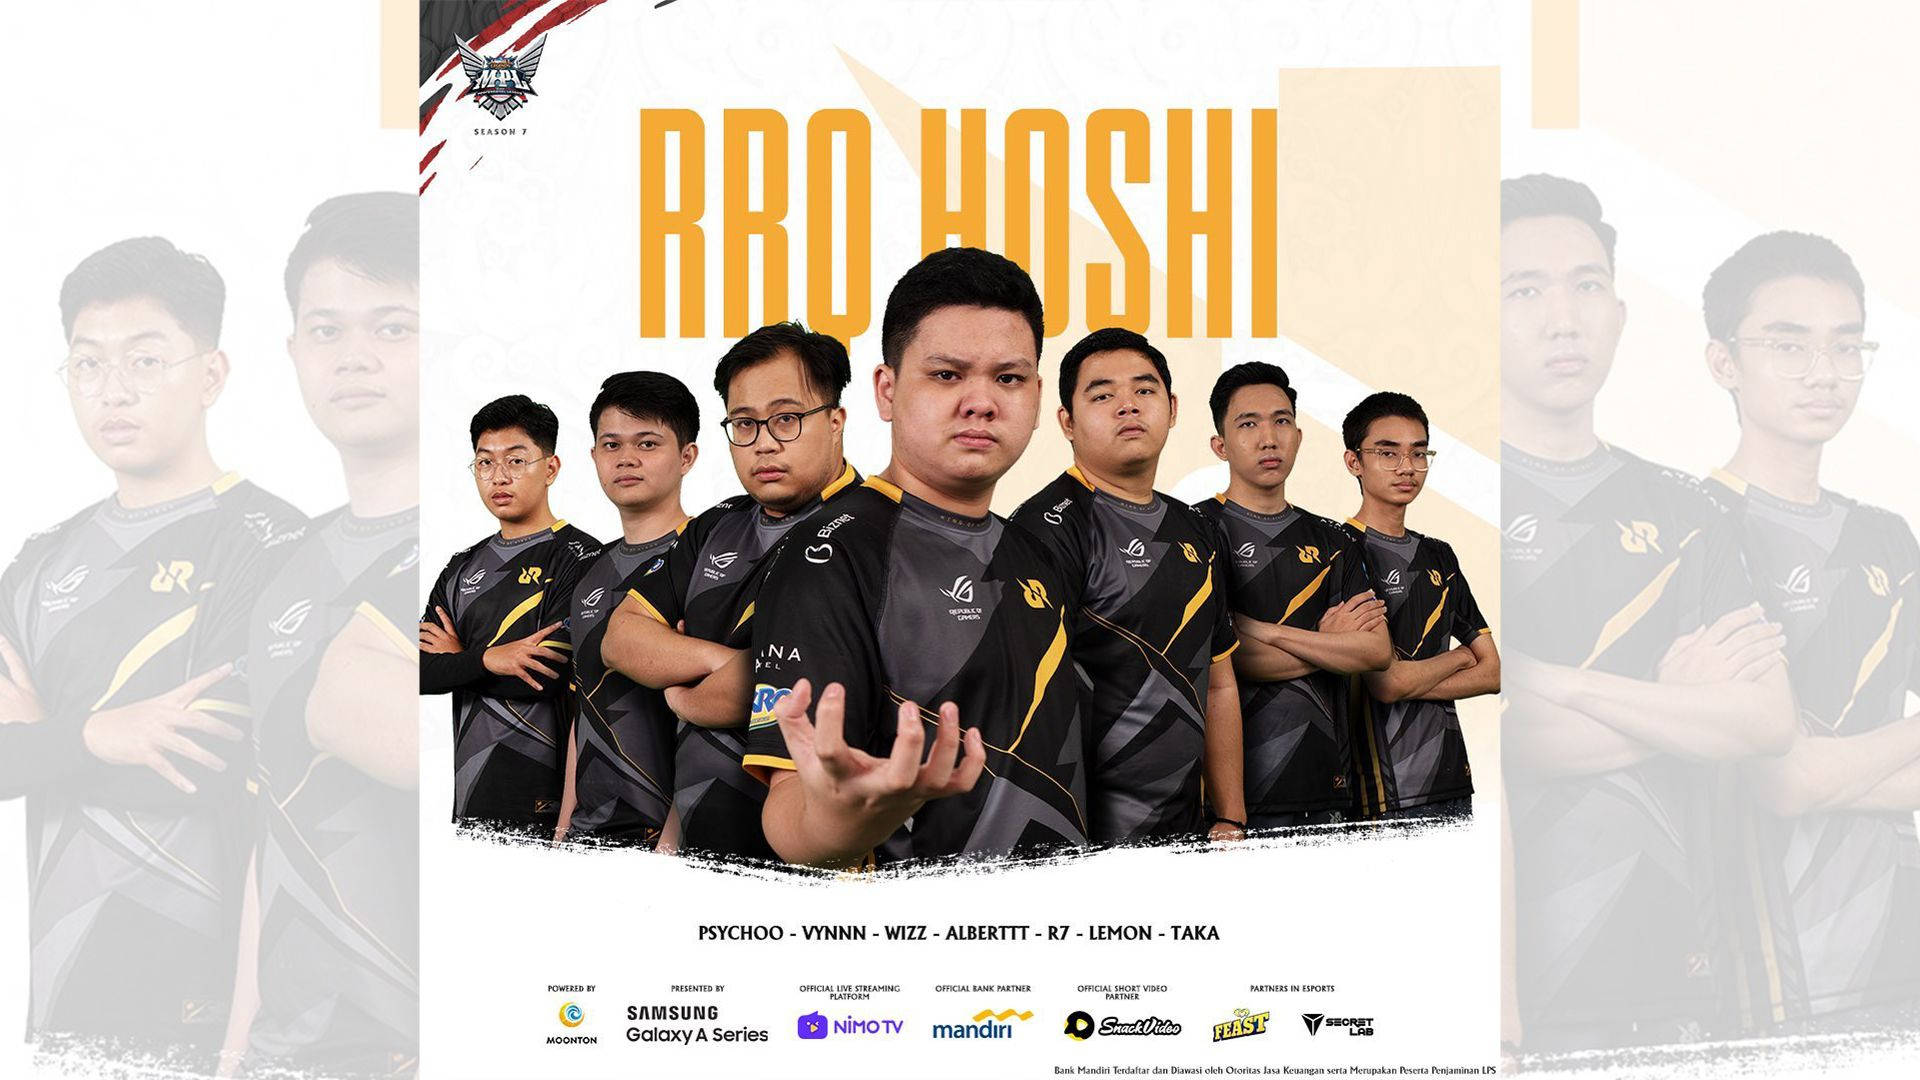 Gorgeous Poster Of Rrq Team Background